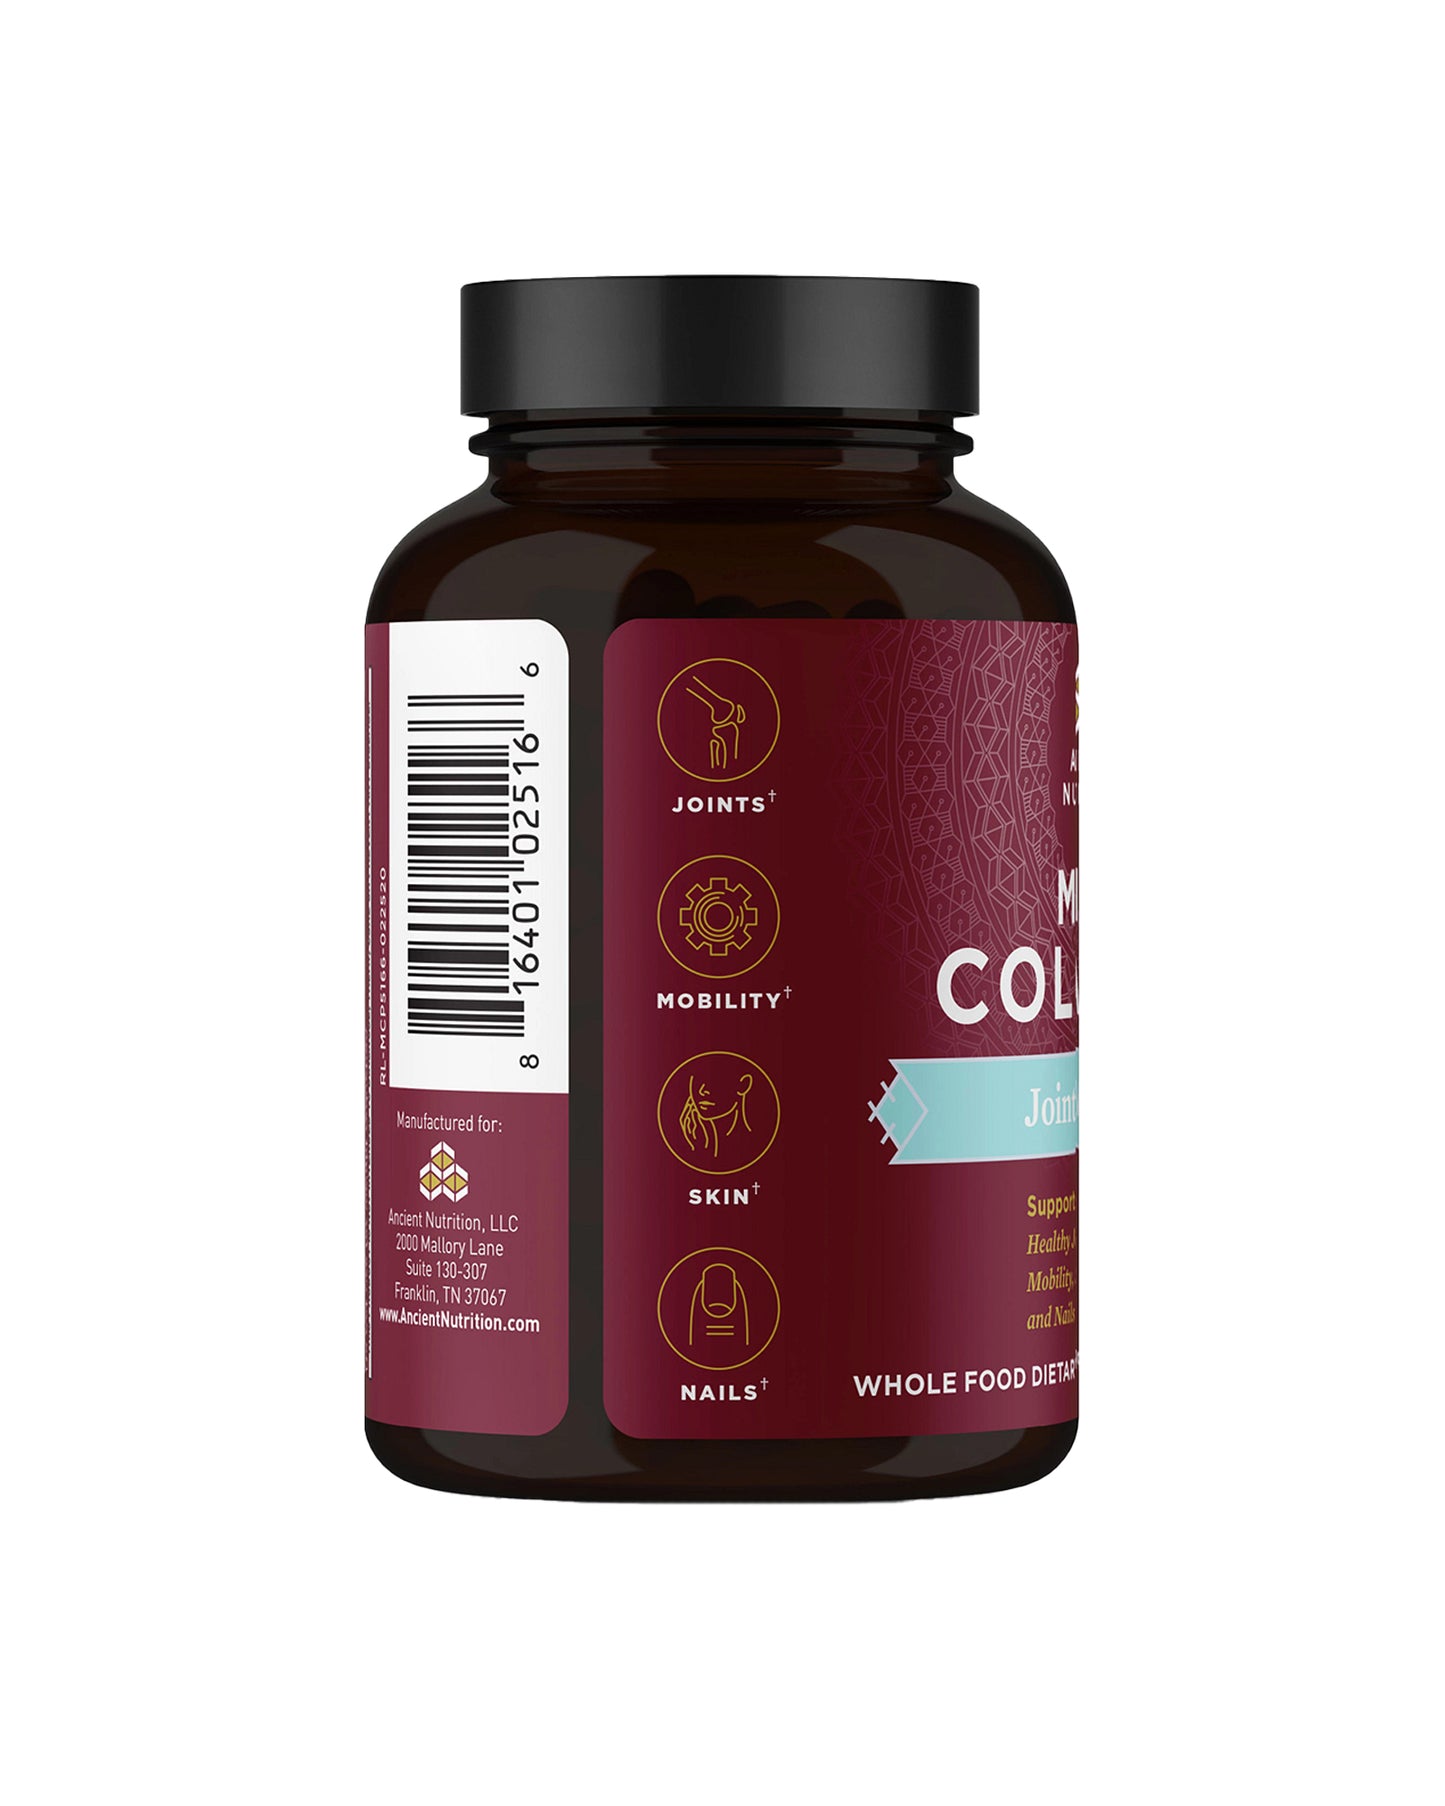 Joint & Mobility Multi Collagen Peptides Capsules